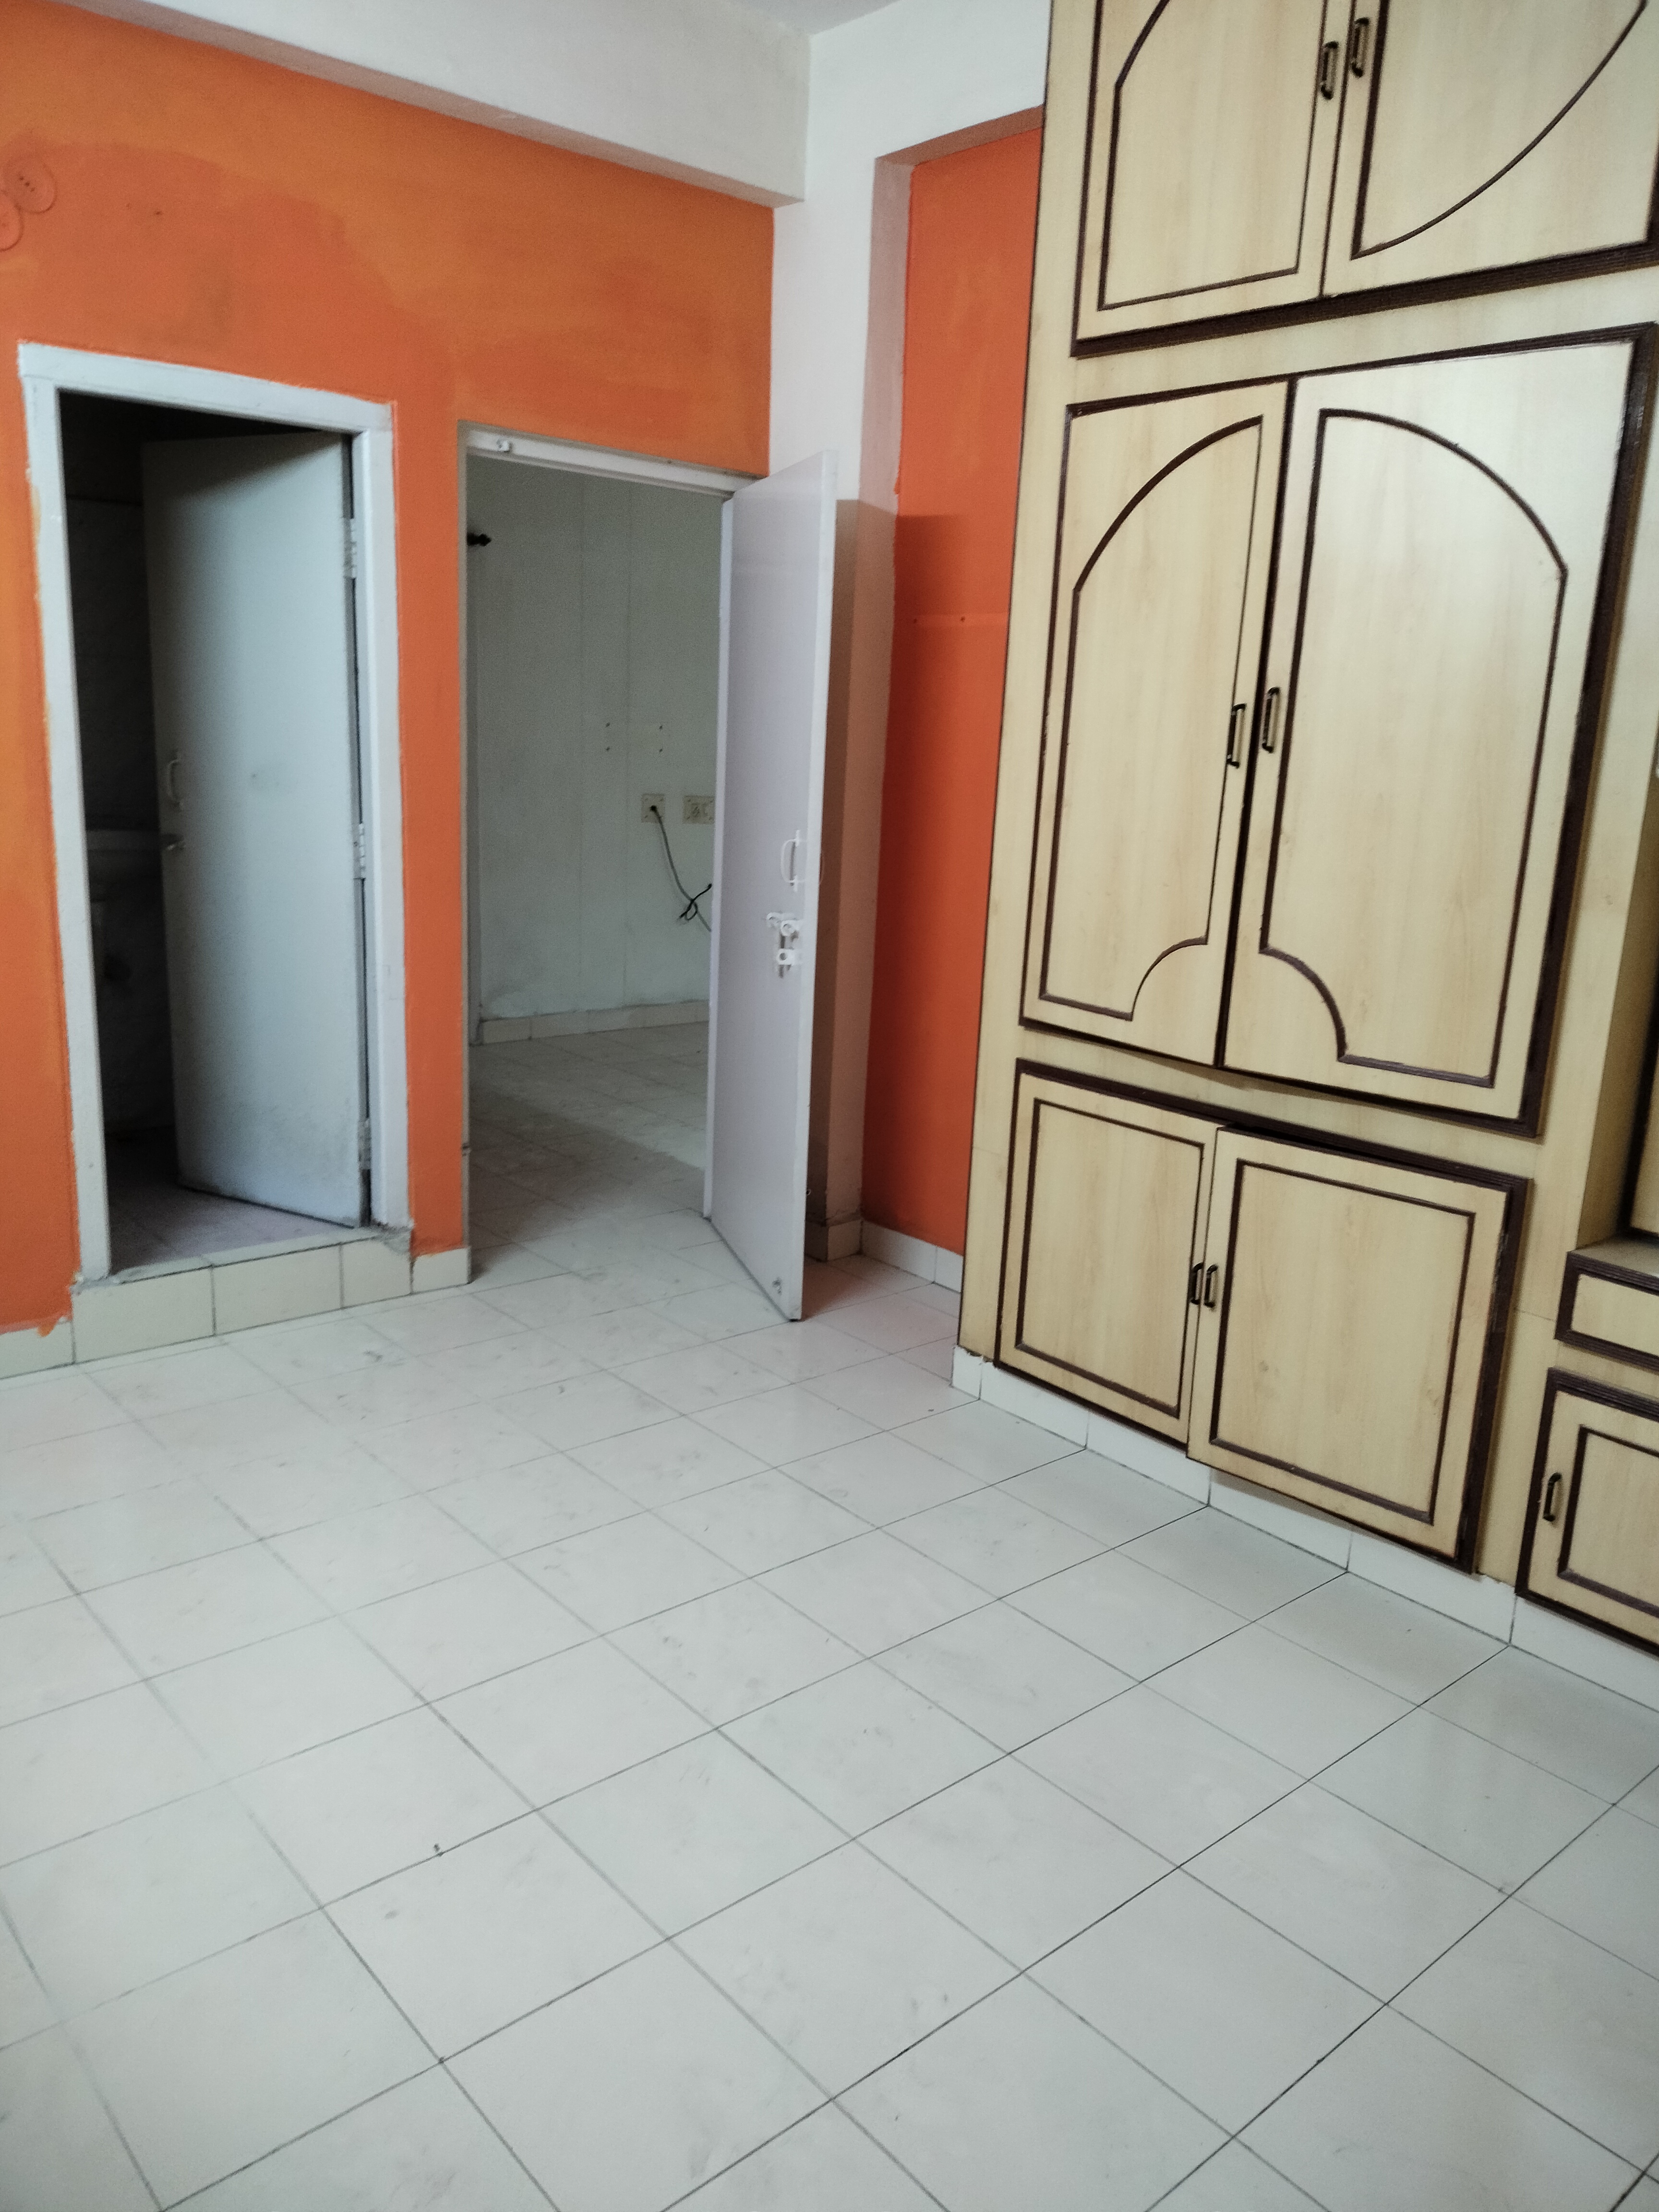 3 BHK Residential Apartment for Rent Only in Jagannadharaju Nagar